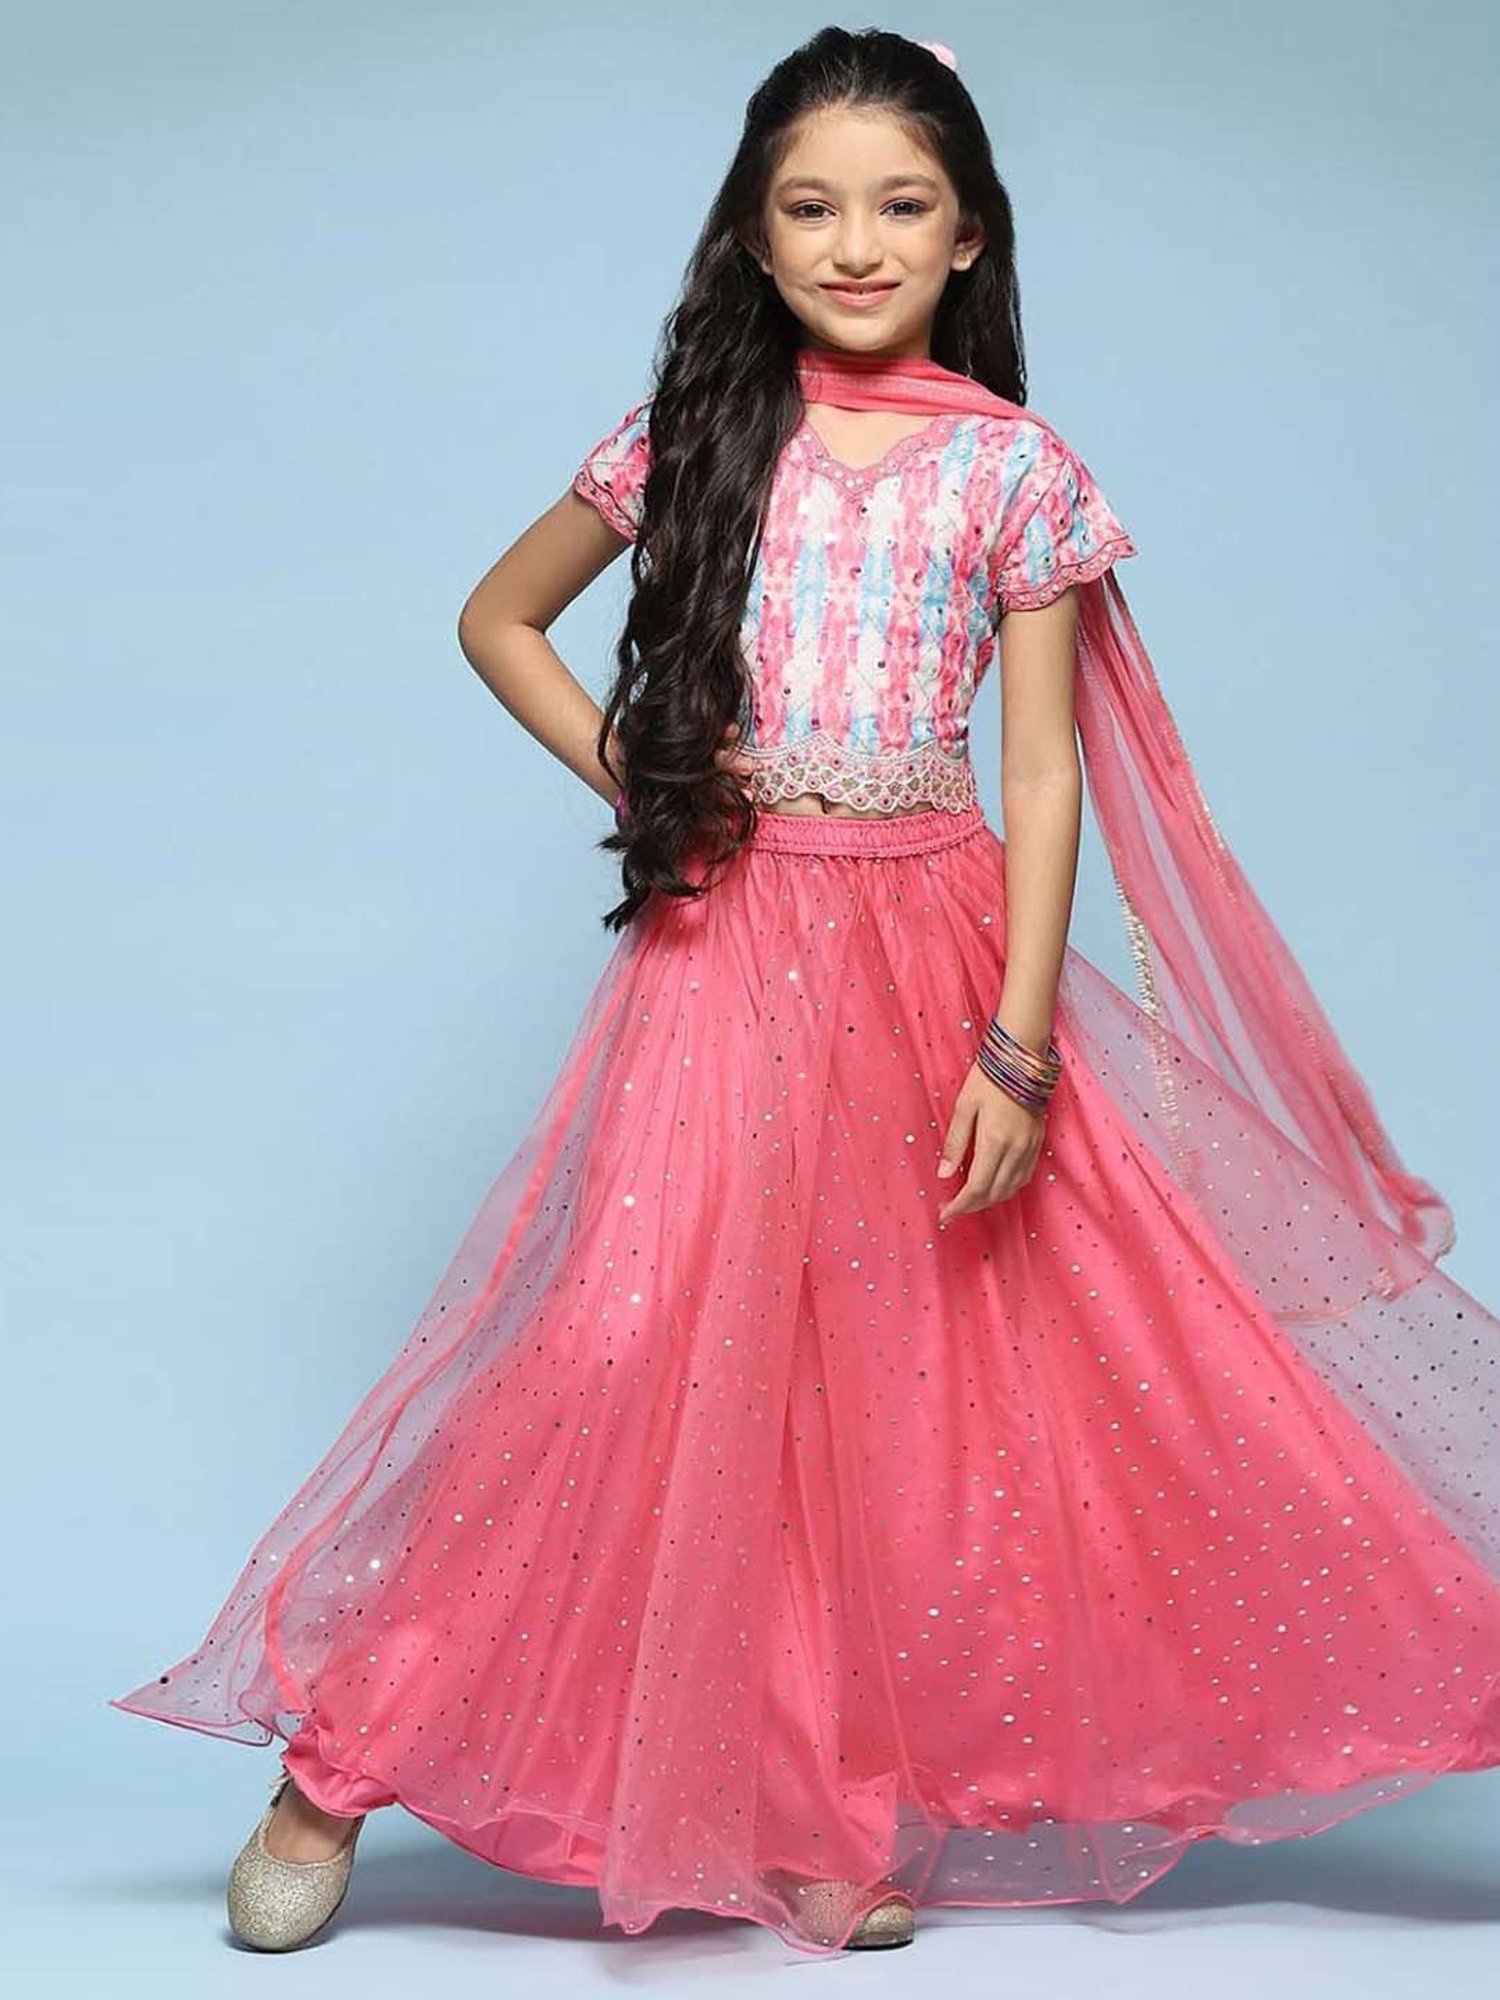 BIBA - ✨ Time to spread the Diwali Vibes ✨ Dress up your baby girl this  #Diwali in our #BibaGirls collection. The range offers dresses, suit sets,  lehenga sets and more for